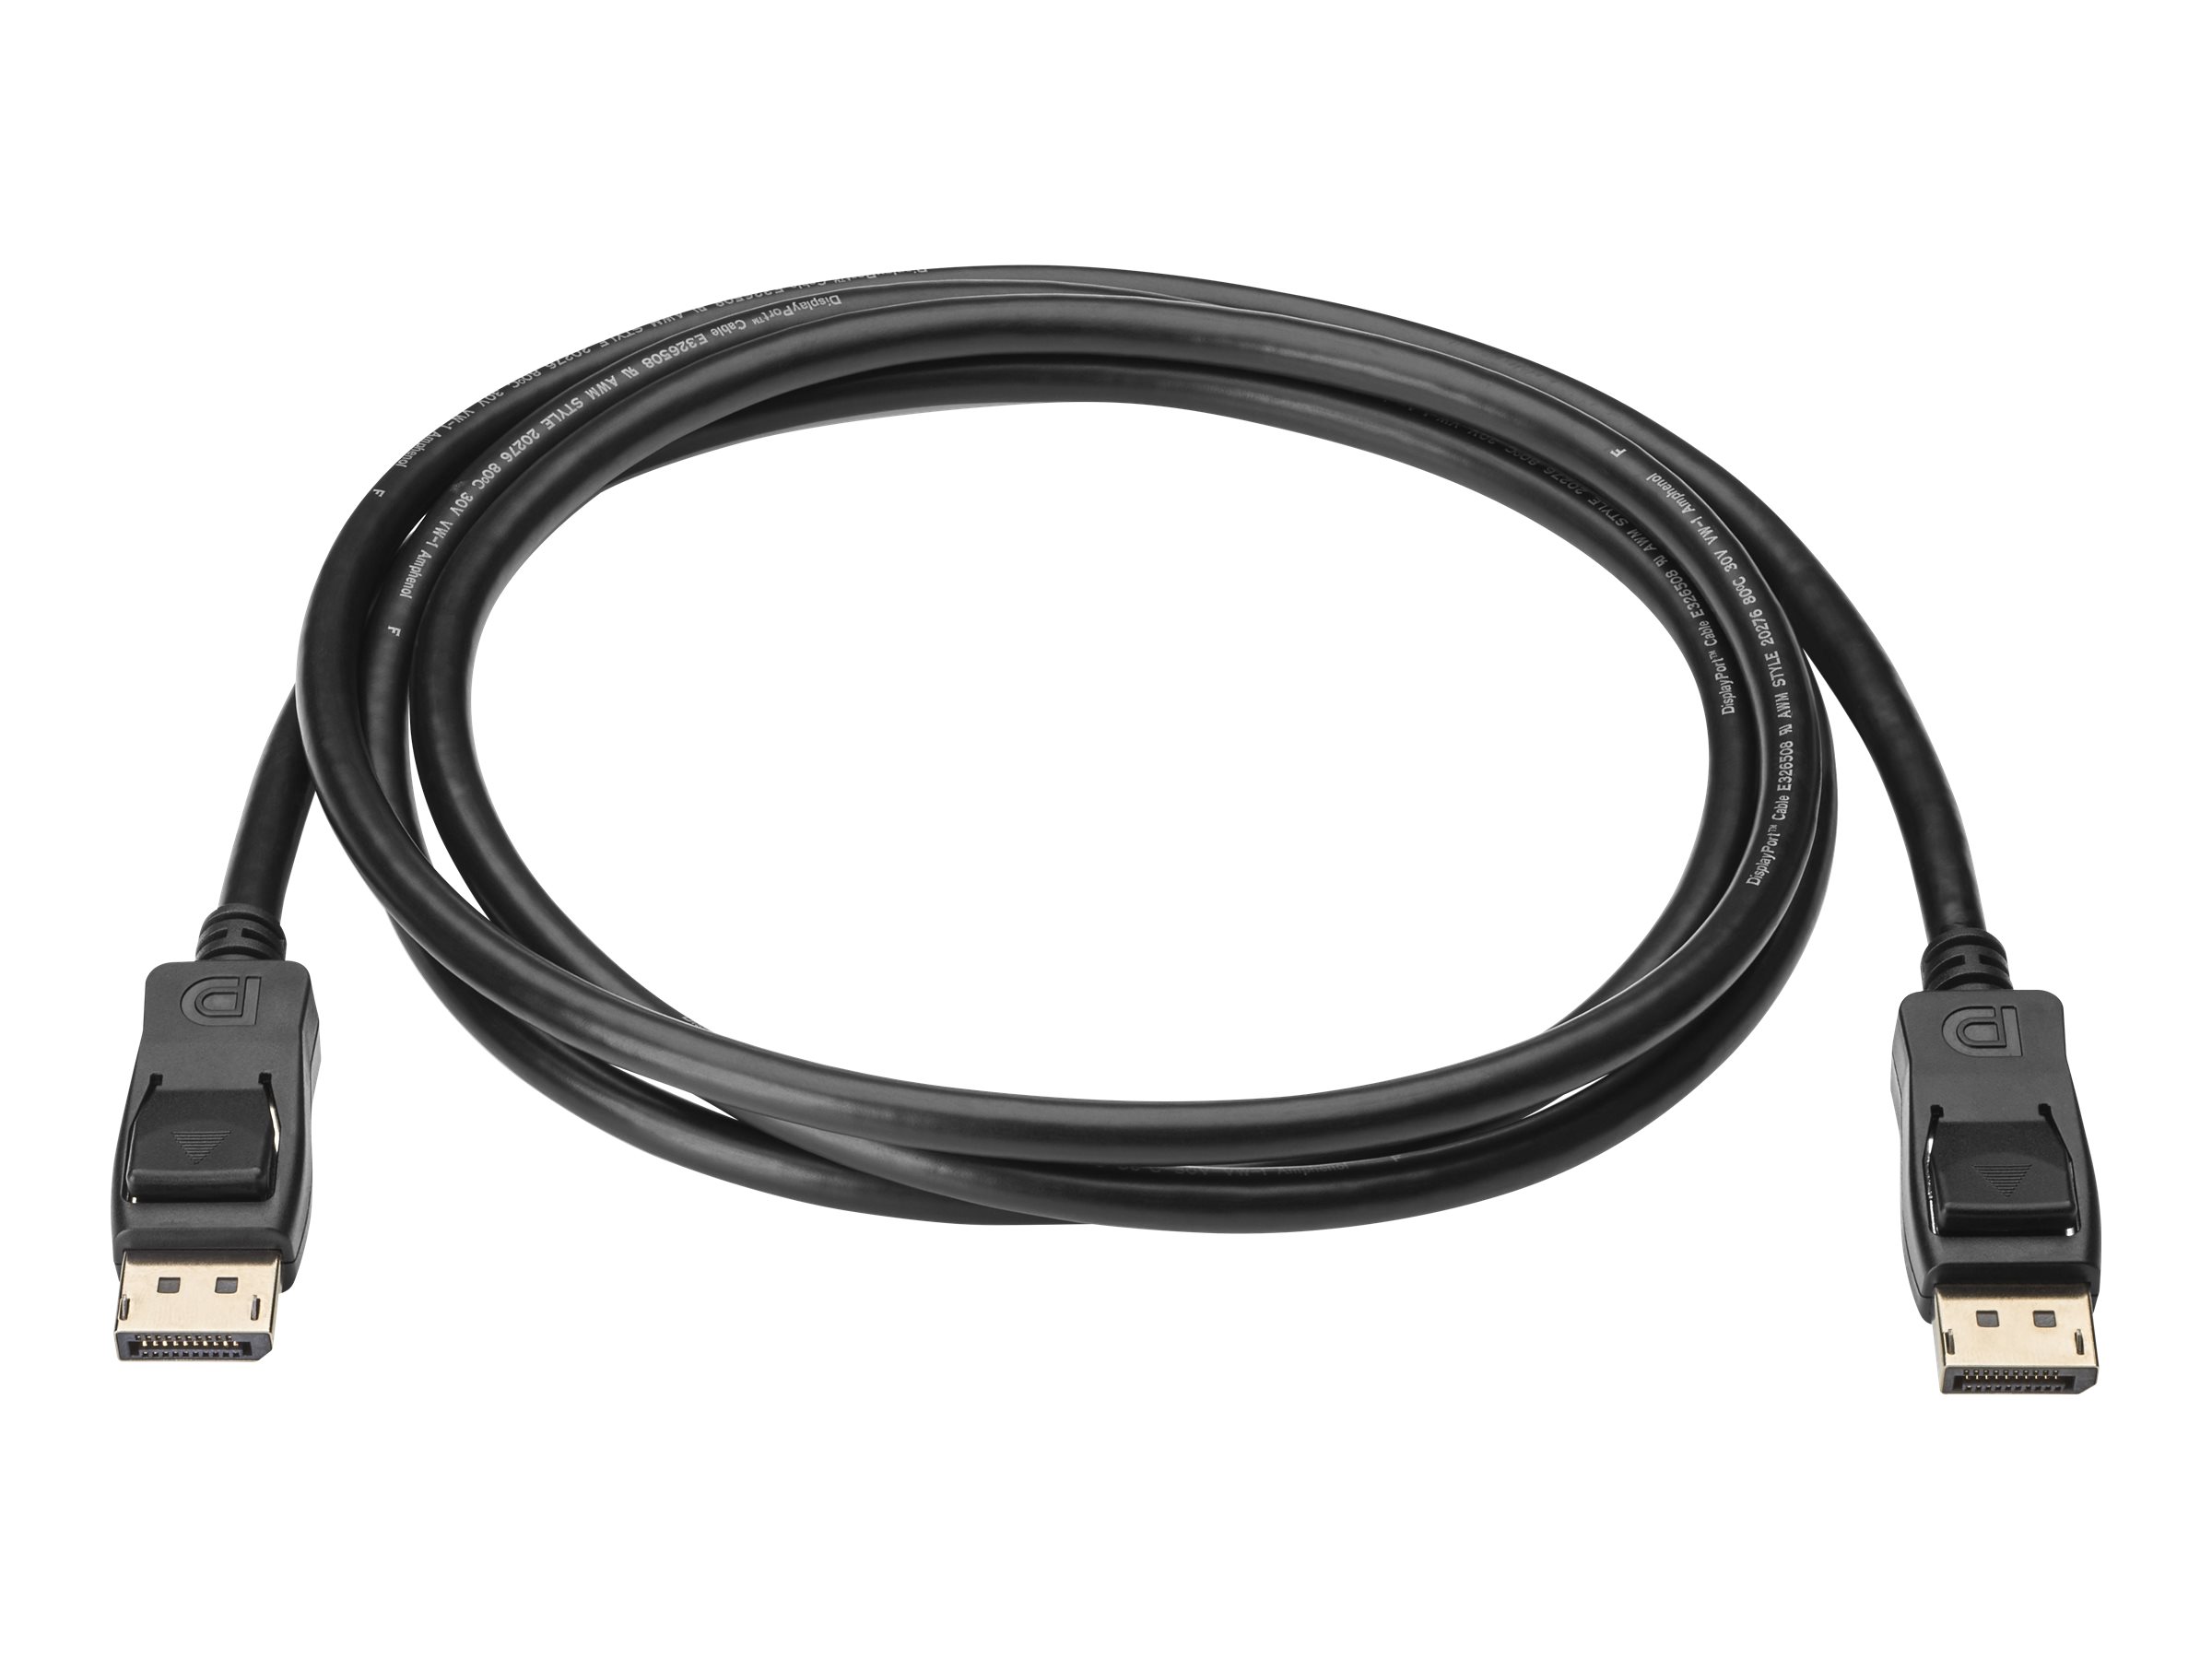 HP Cable Kit for CFD - Bildschirm / Strom / USB Kabelset - für ElitePOS G1 Retail System 141, 143, 145; Engage One; RP9 G1 Retail System 9015, 9018, 9118